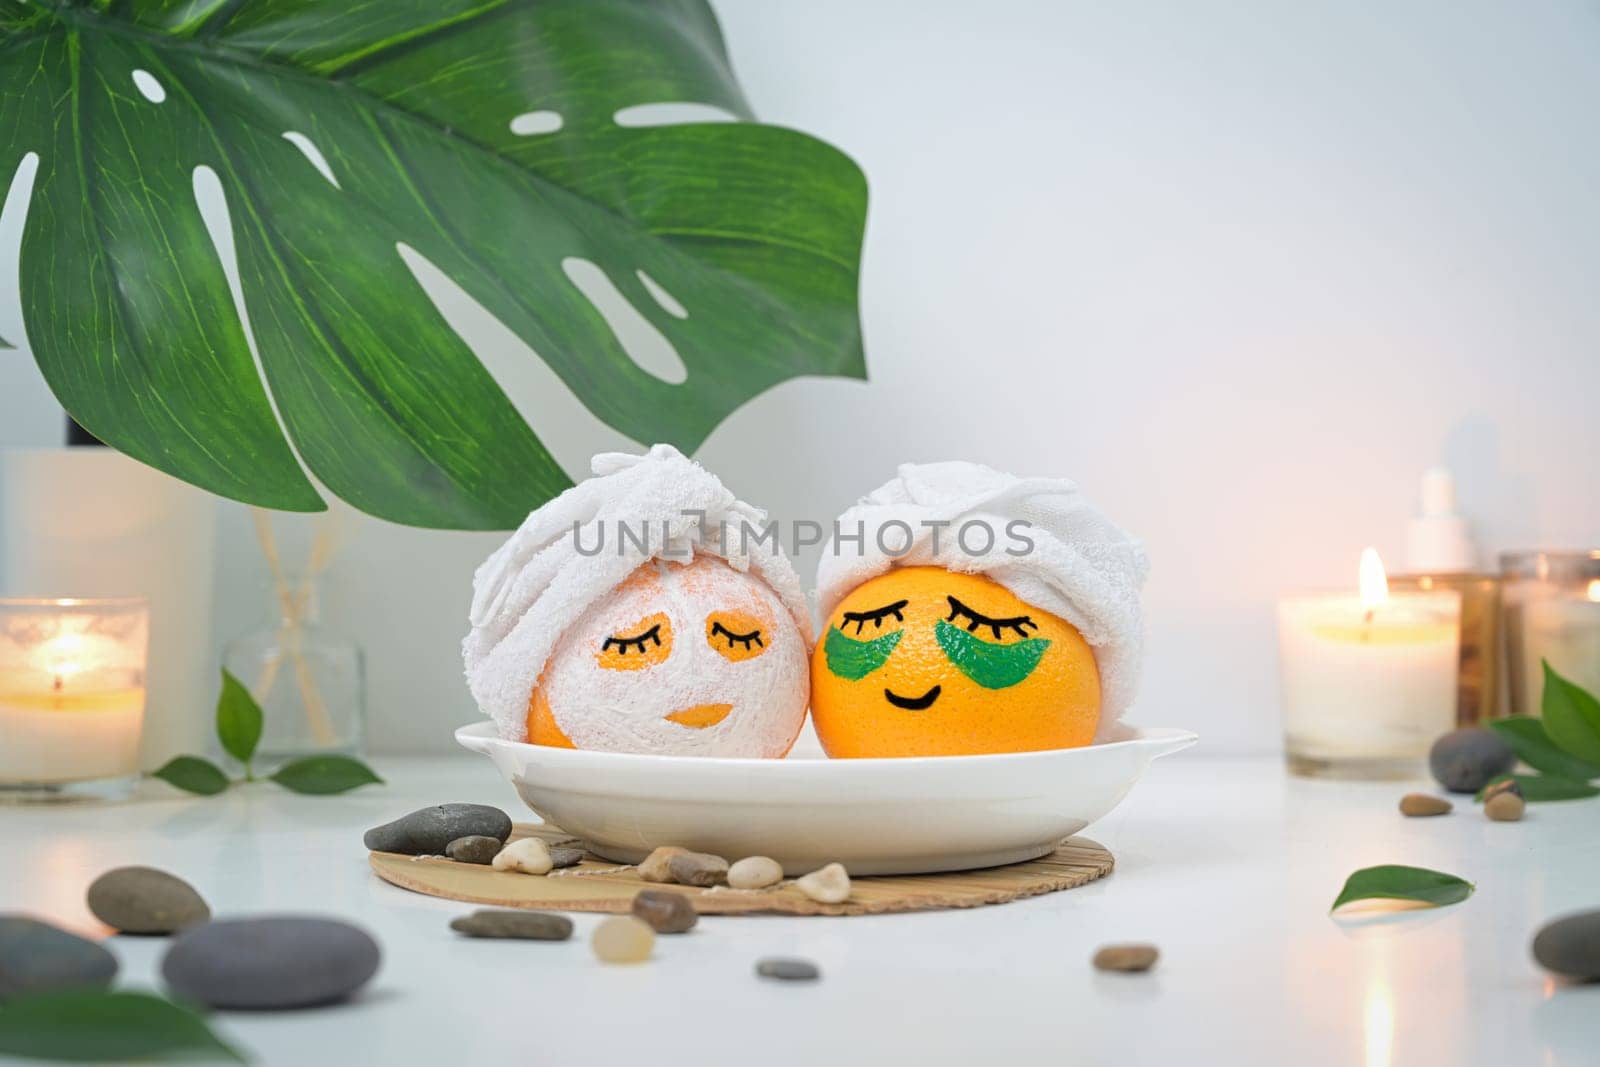 Two orange fruits in face mask looking like in bath or Onsen. Spa treatment and self care concept.